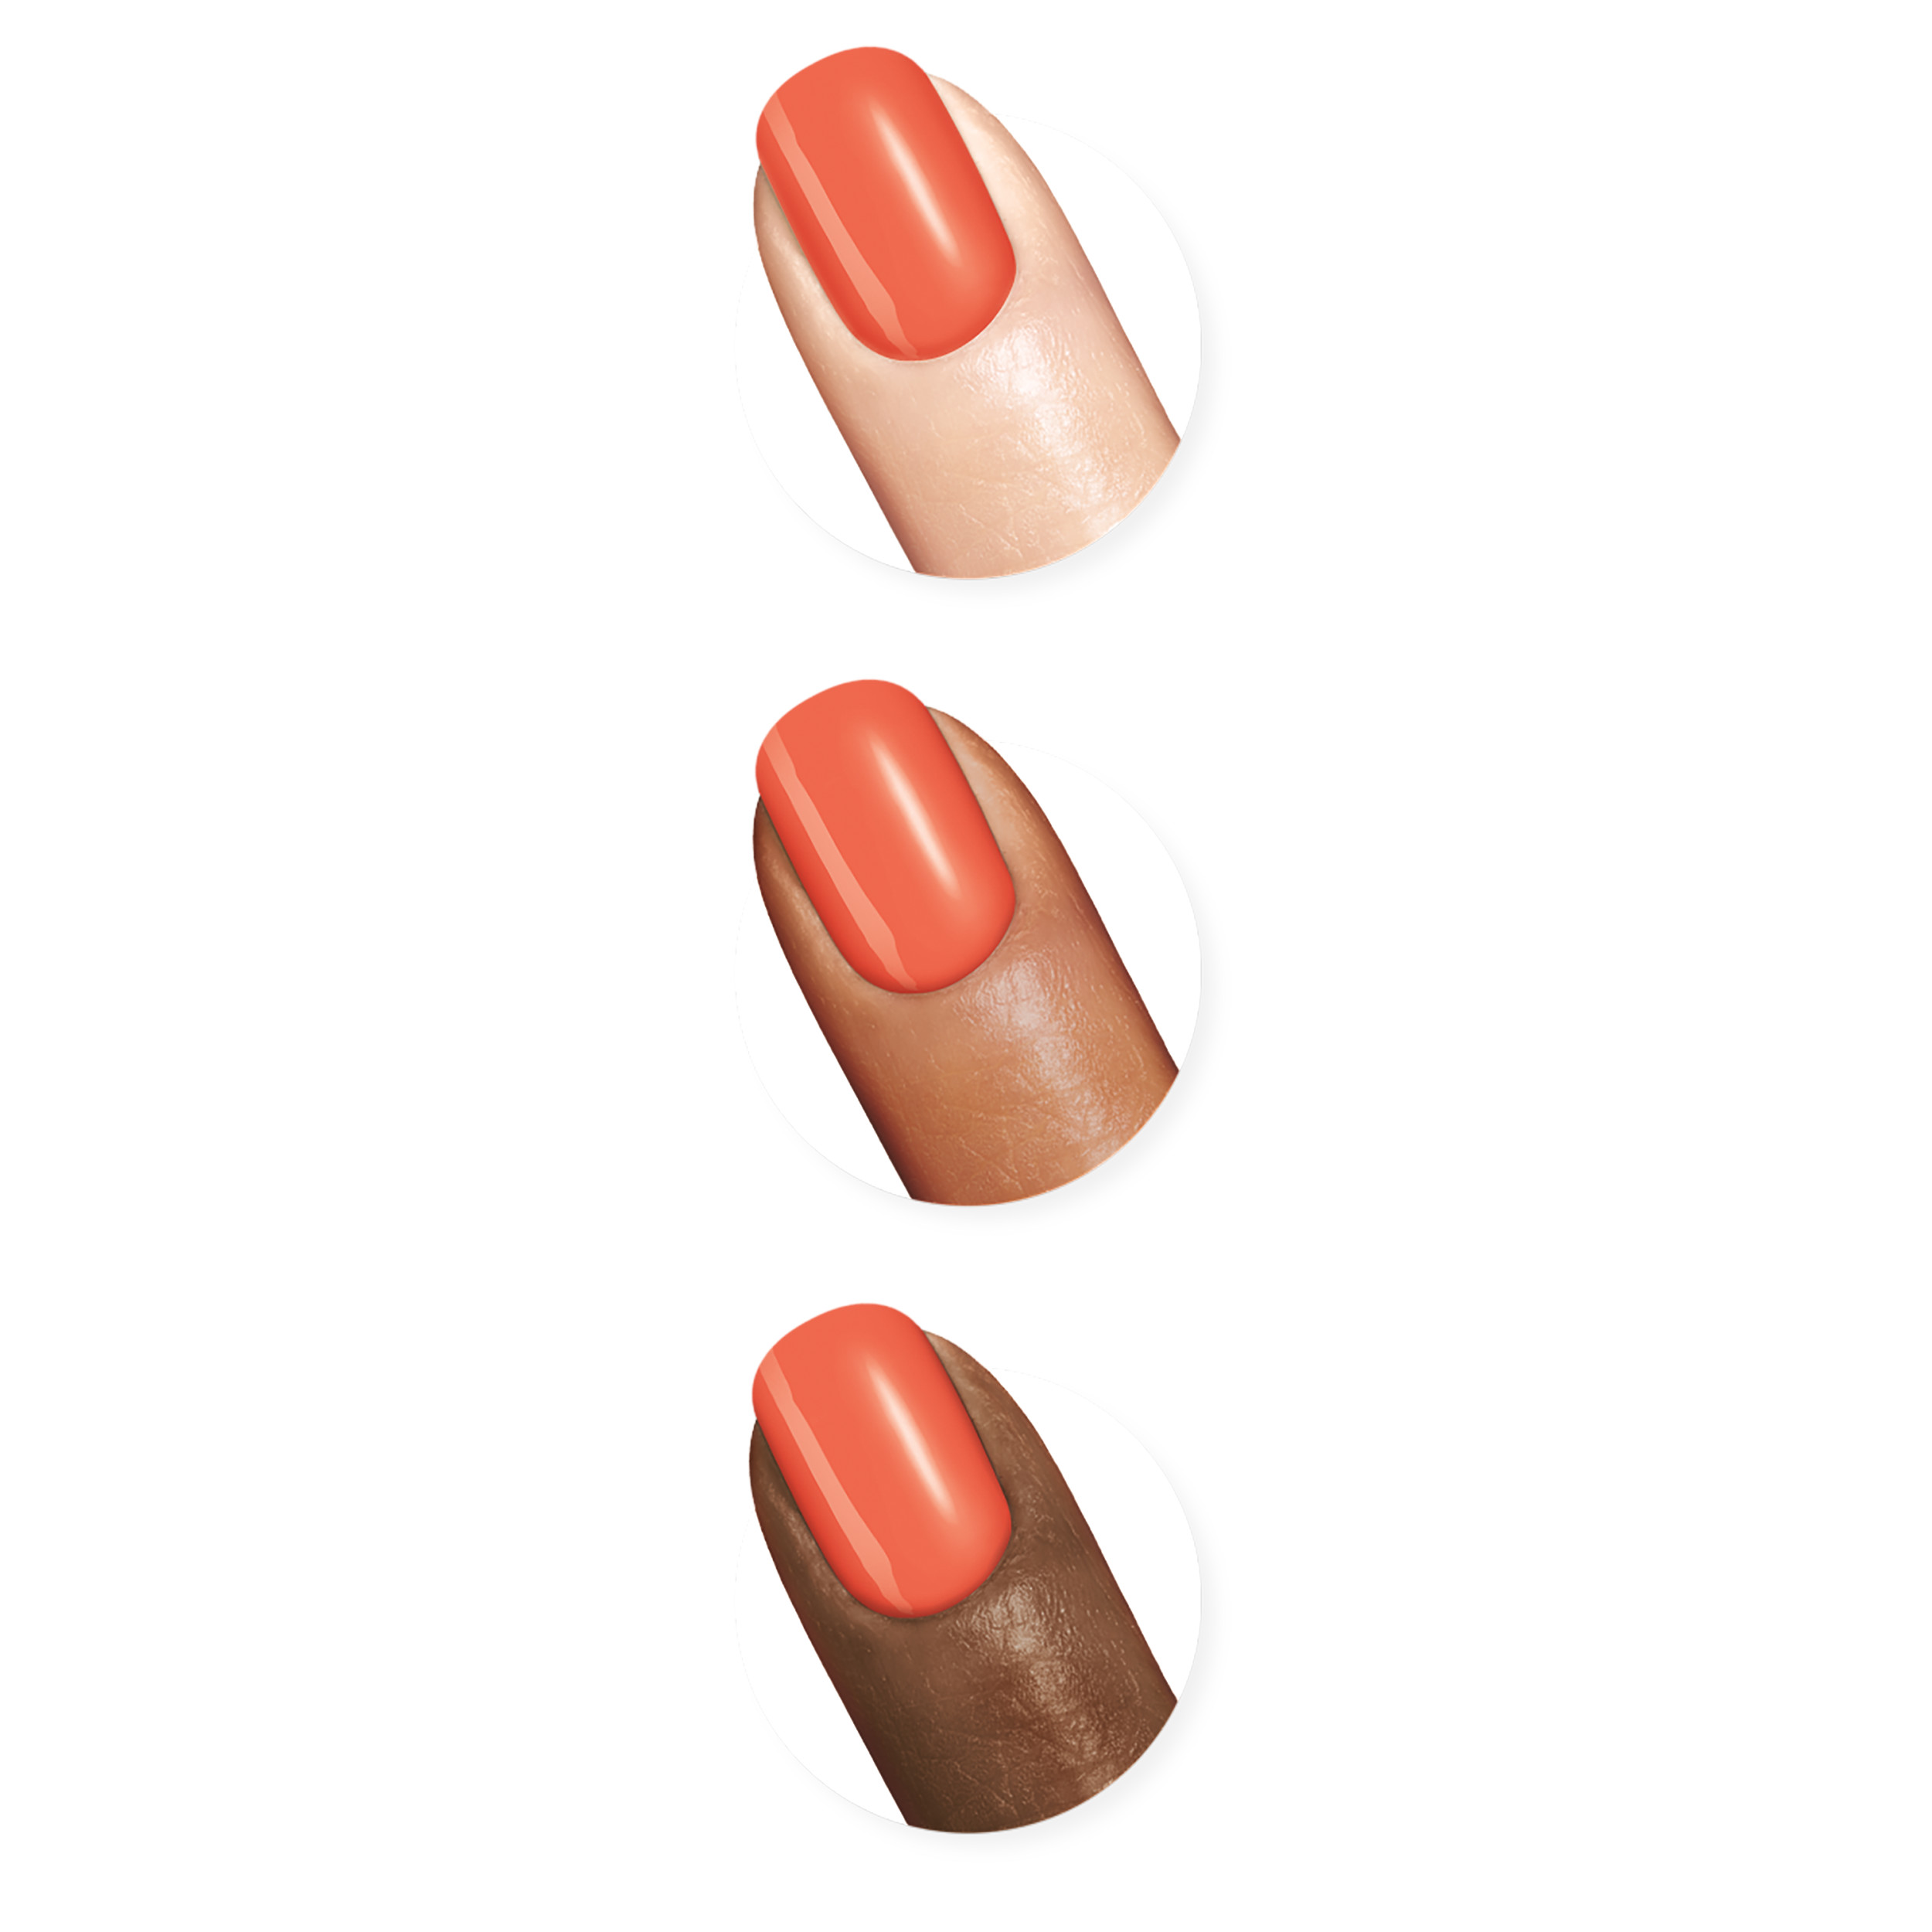 Sally Hansen Xtreme Wear Nail Polish, Pixie Peach, 0.4 oz, Chip Resistant, Bold Color - image 4 of 14